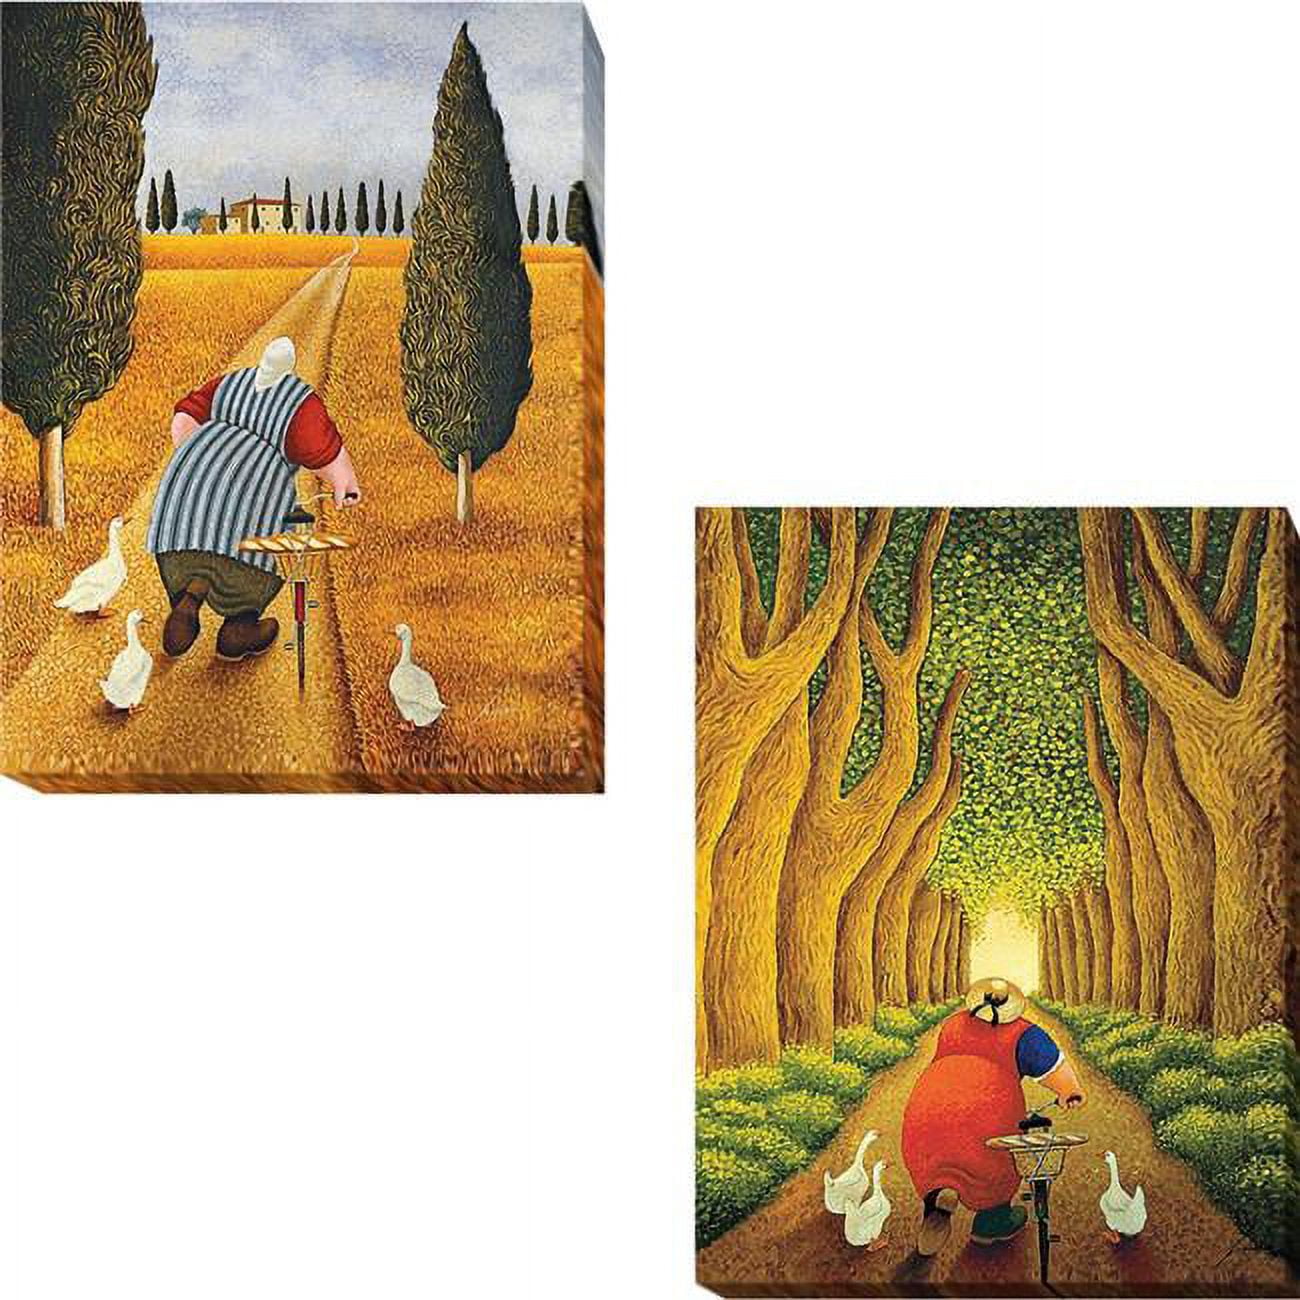 1216r694ig Lady With Fresh Bread & Home From The Market By Lowell Herrero 2-piece Premium Gallery-wrapped Canvas Giclee Art Set - 12 X 16 X 1.5 In.